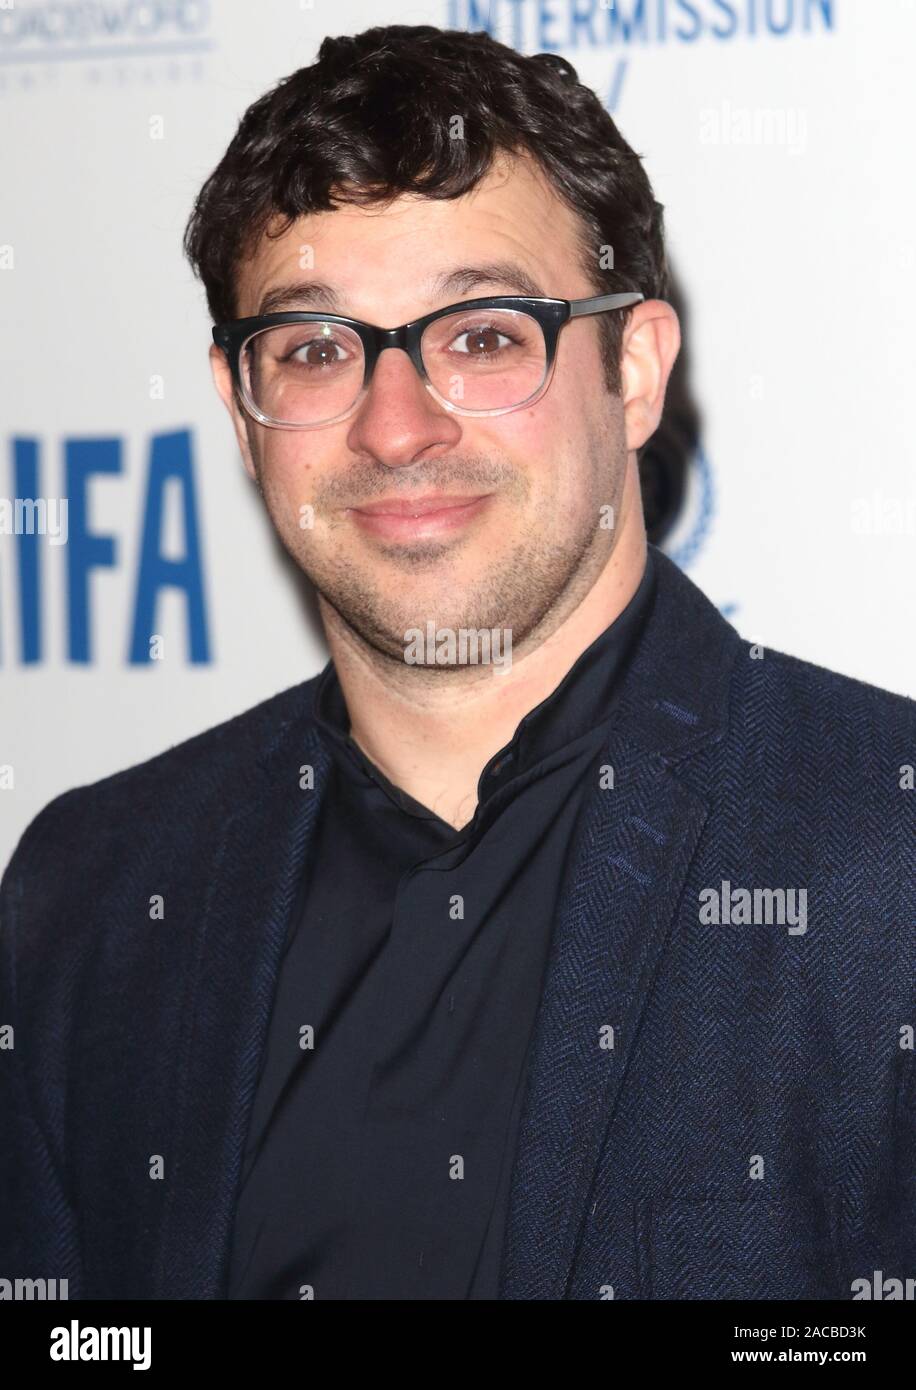 Simon Bird attends the 22nd British Independent Film Awards (BIFAs) at Old Billingsgate in London. Stock Photo